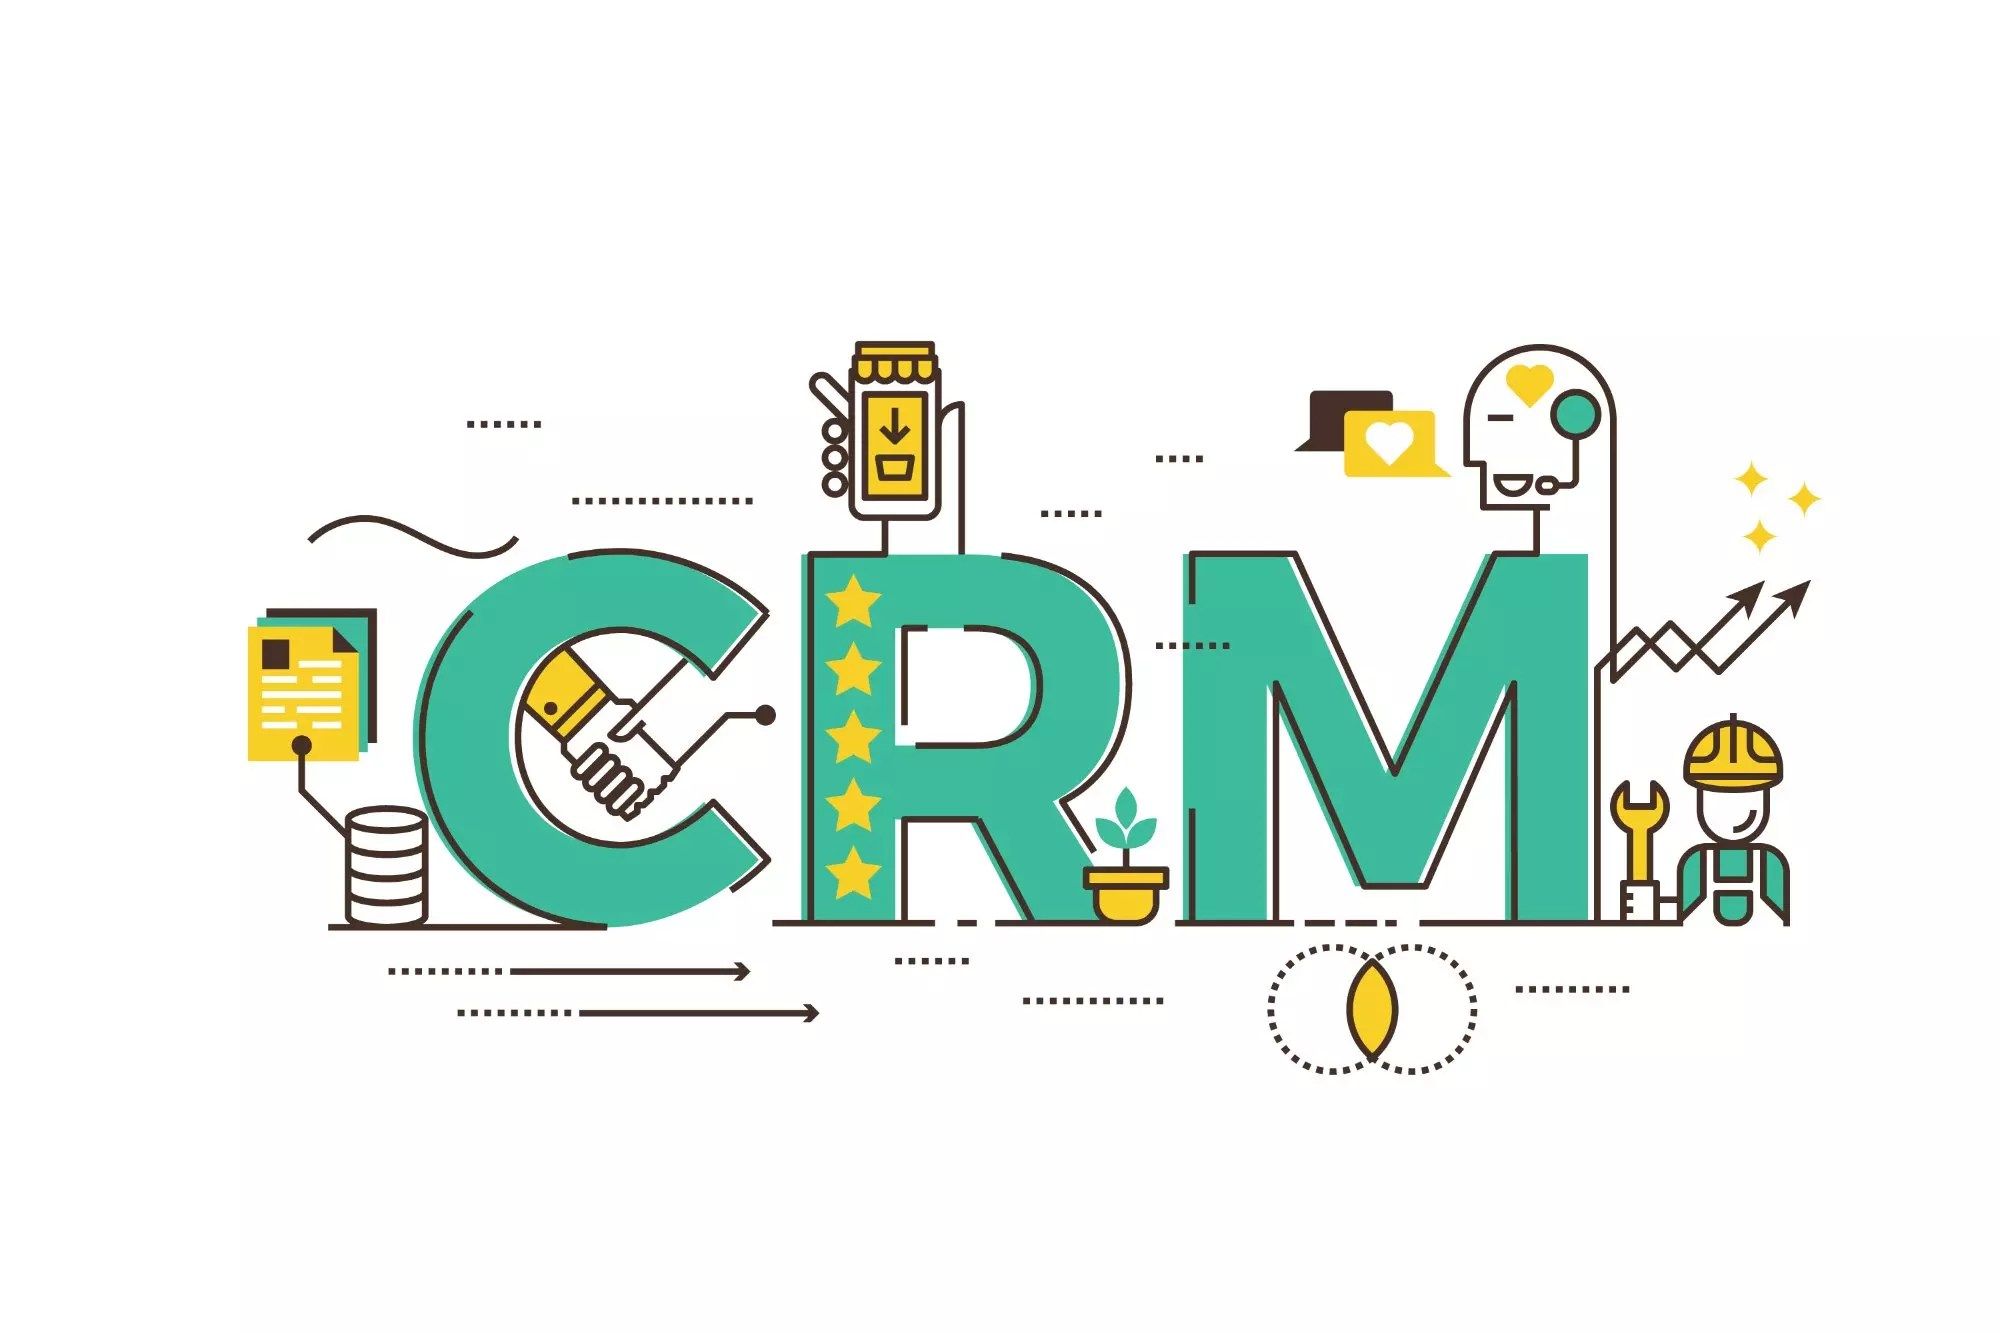 How Big Data Turns CRM into Something Truly Valuable